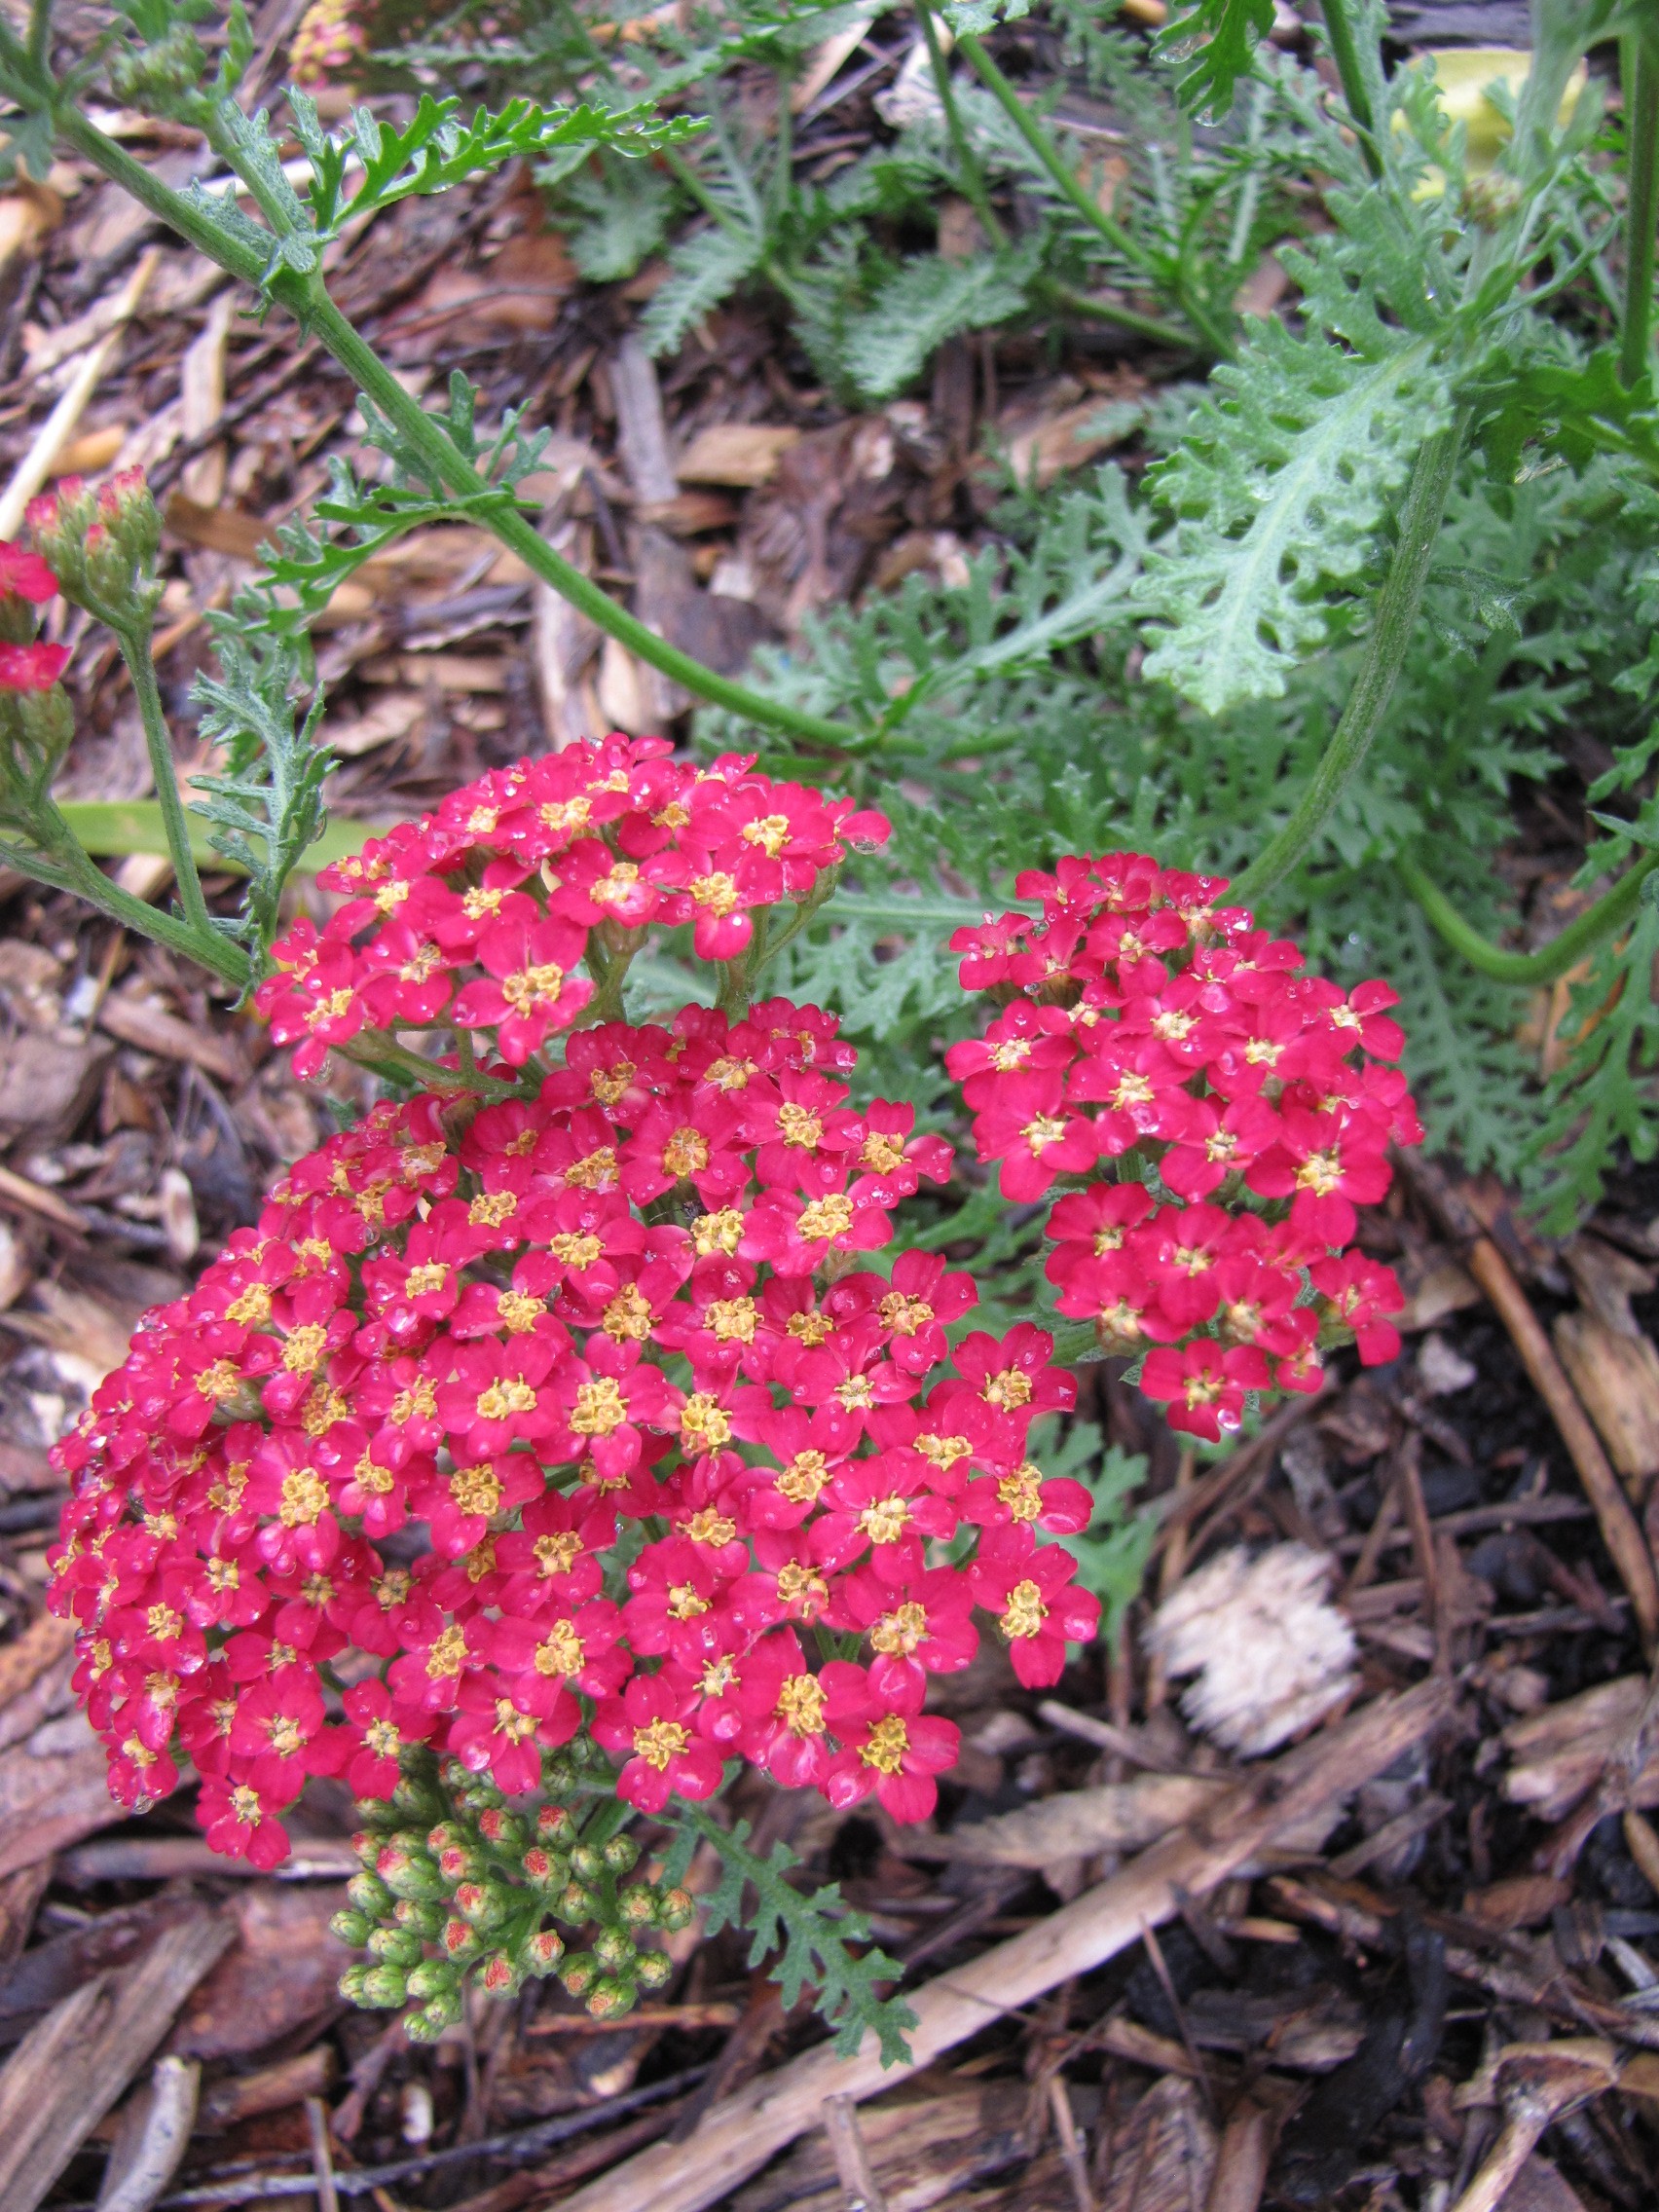 Red Yarrow ( Achillea millefolium).  Great permaculture plant - attracts man beneficial insects and can be used to staunch bleeding from cuts (works really well, actually.)